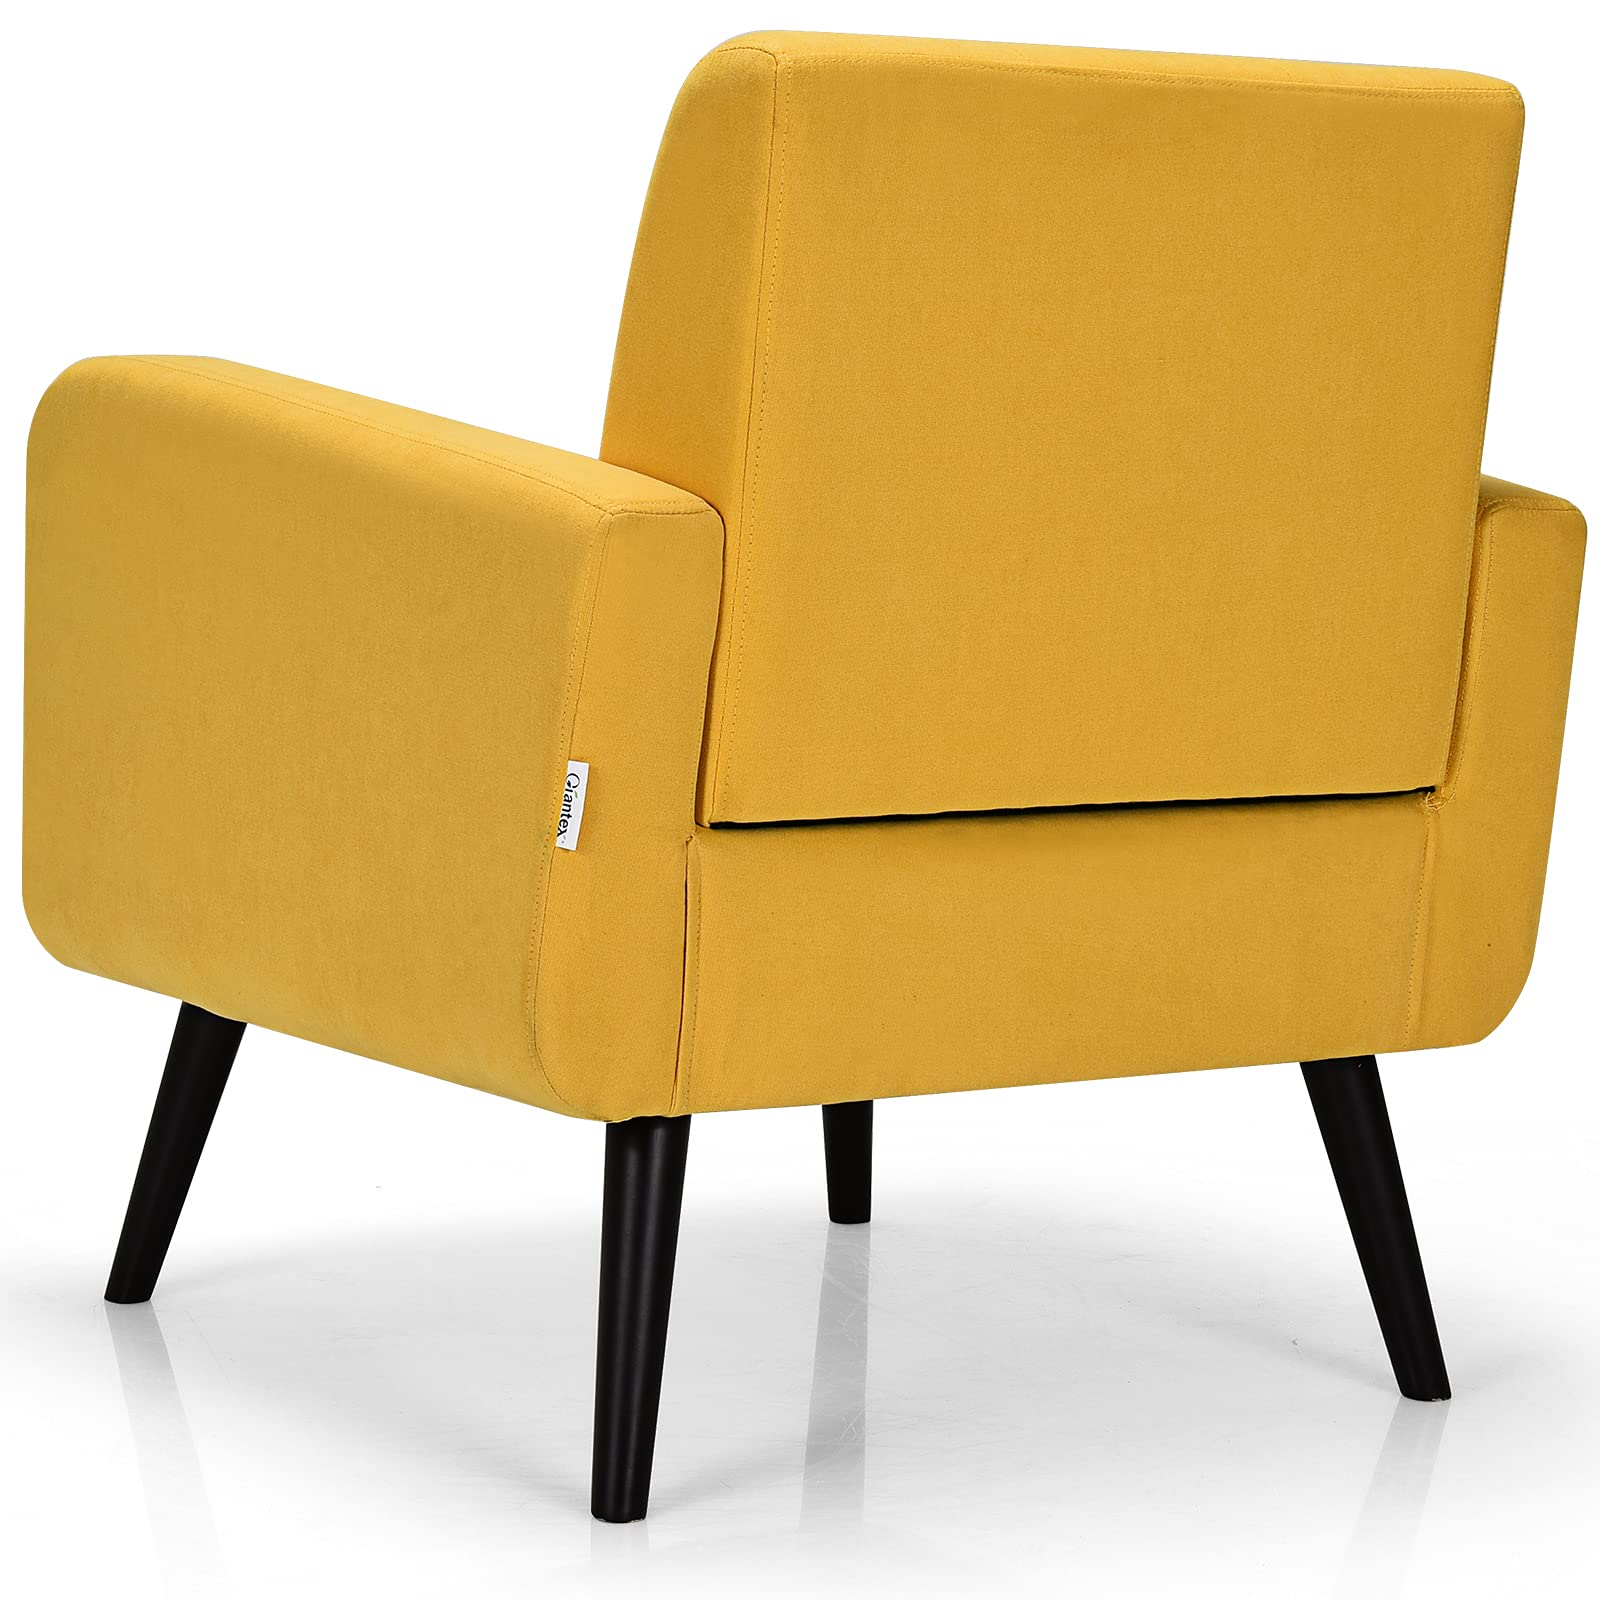 Giantex Set of 2 Modern Upholstered Accent Chairs